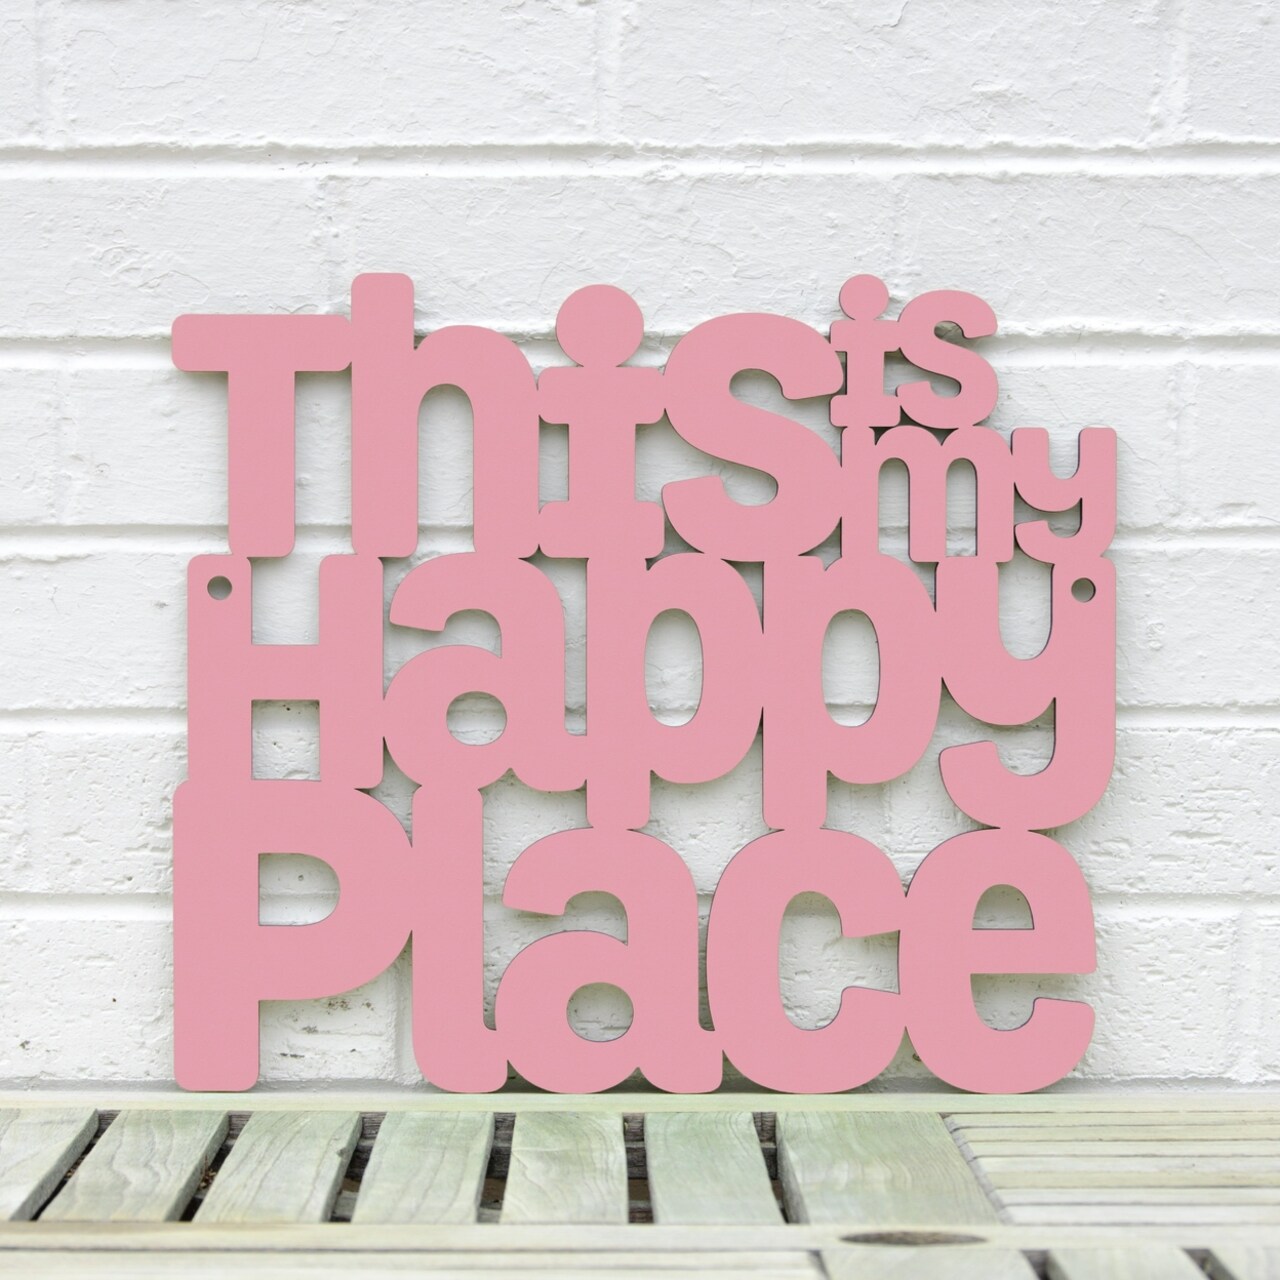 Spunky Fluff This Is My Happy Place Laser Cut Wood Wall Decor